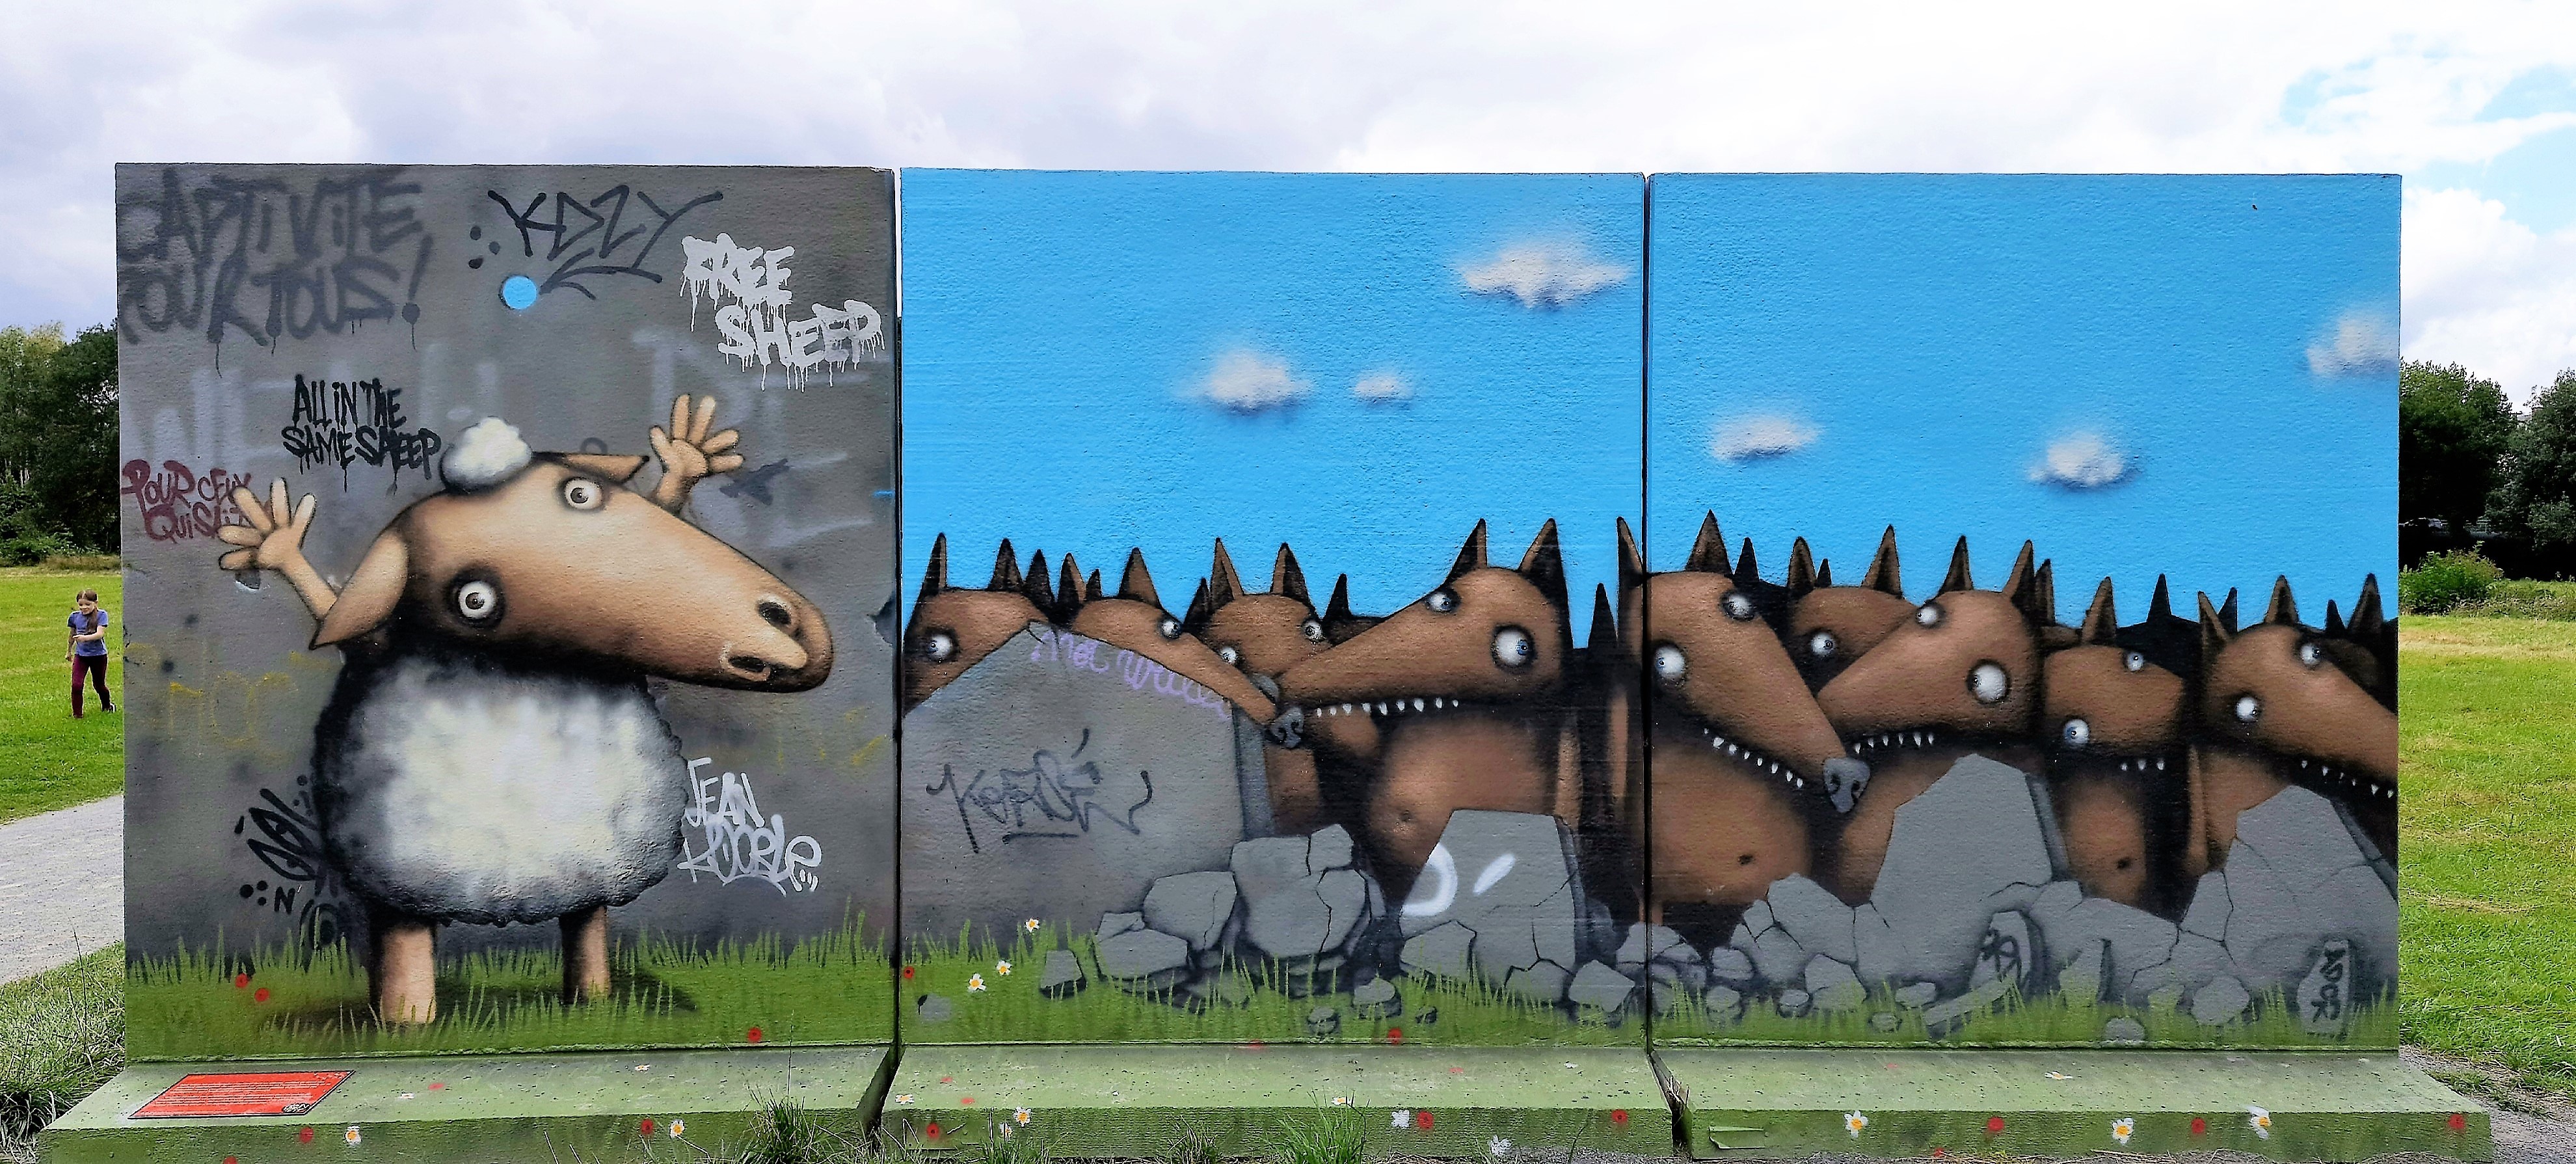 Graffiti 6939  by the artist Ador captured by Mephisroth in Le Mans France